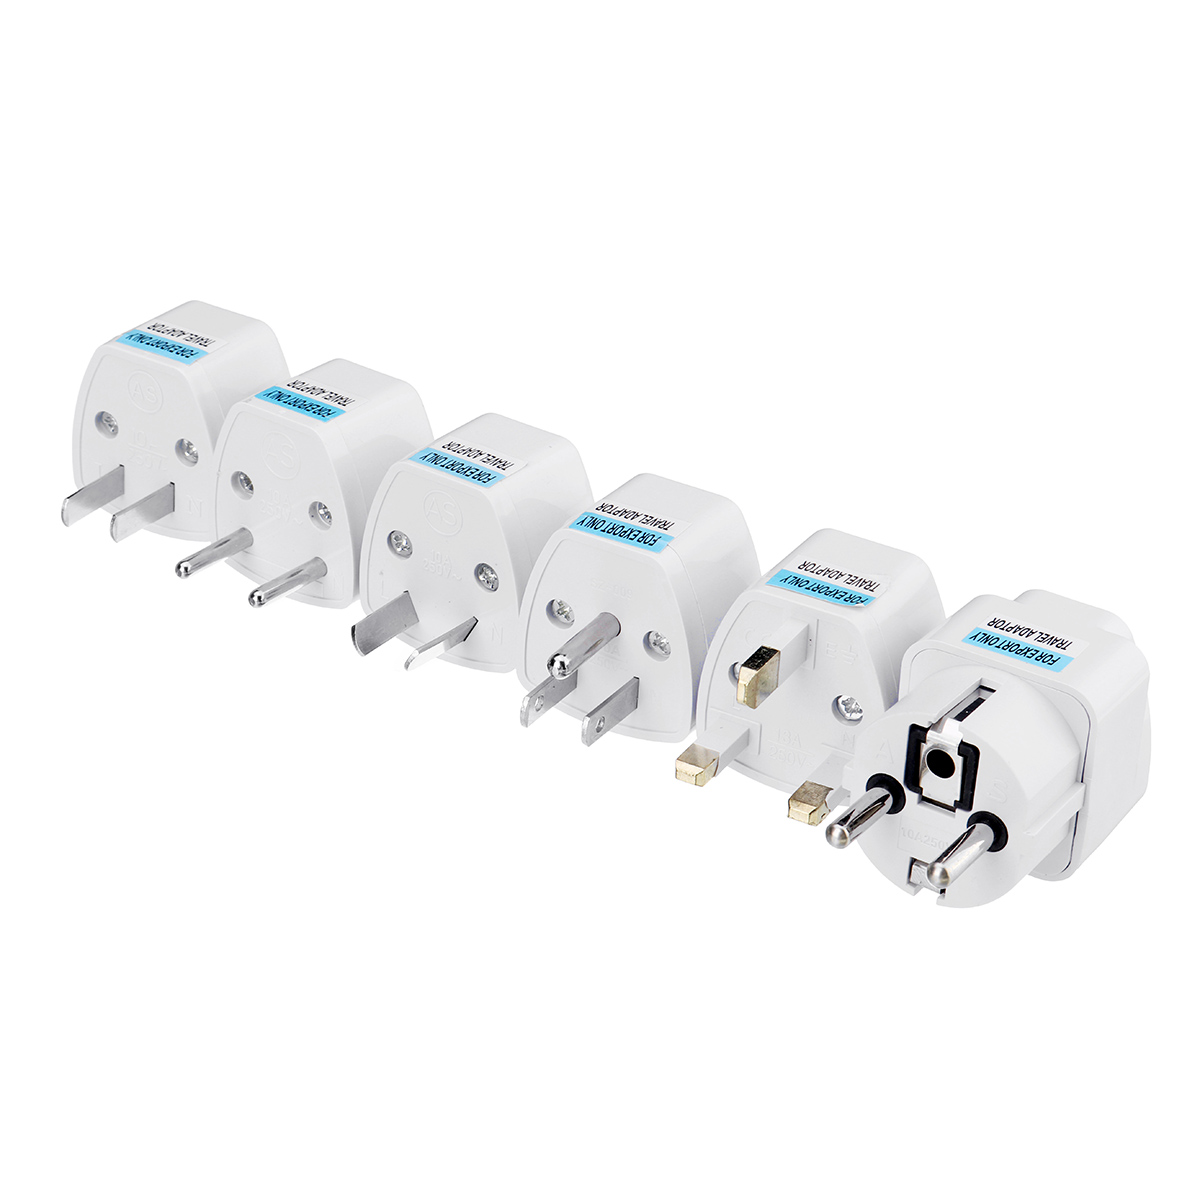 Global-Universal-Adapter-Plug-Adapter-Charger-Travel-Wall-AC-Power-Charger-Outlet-Adapter-Converter-1812356-7